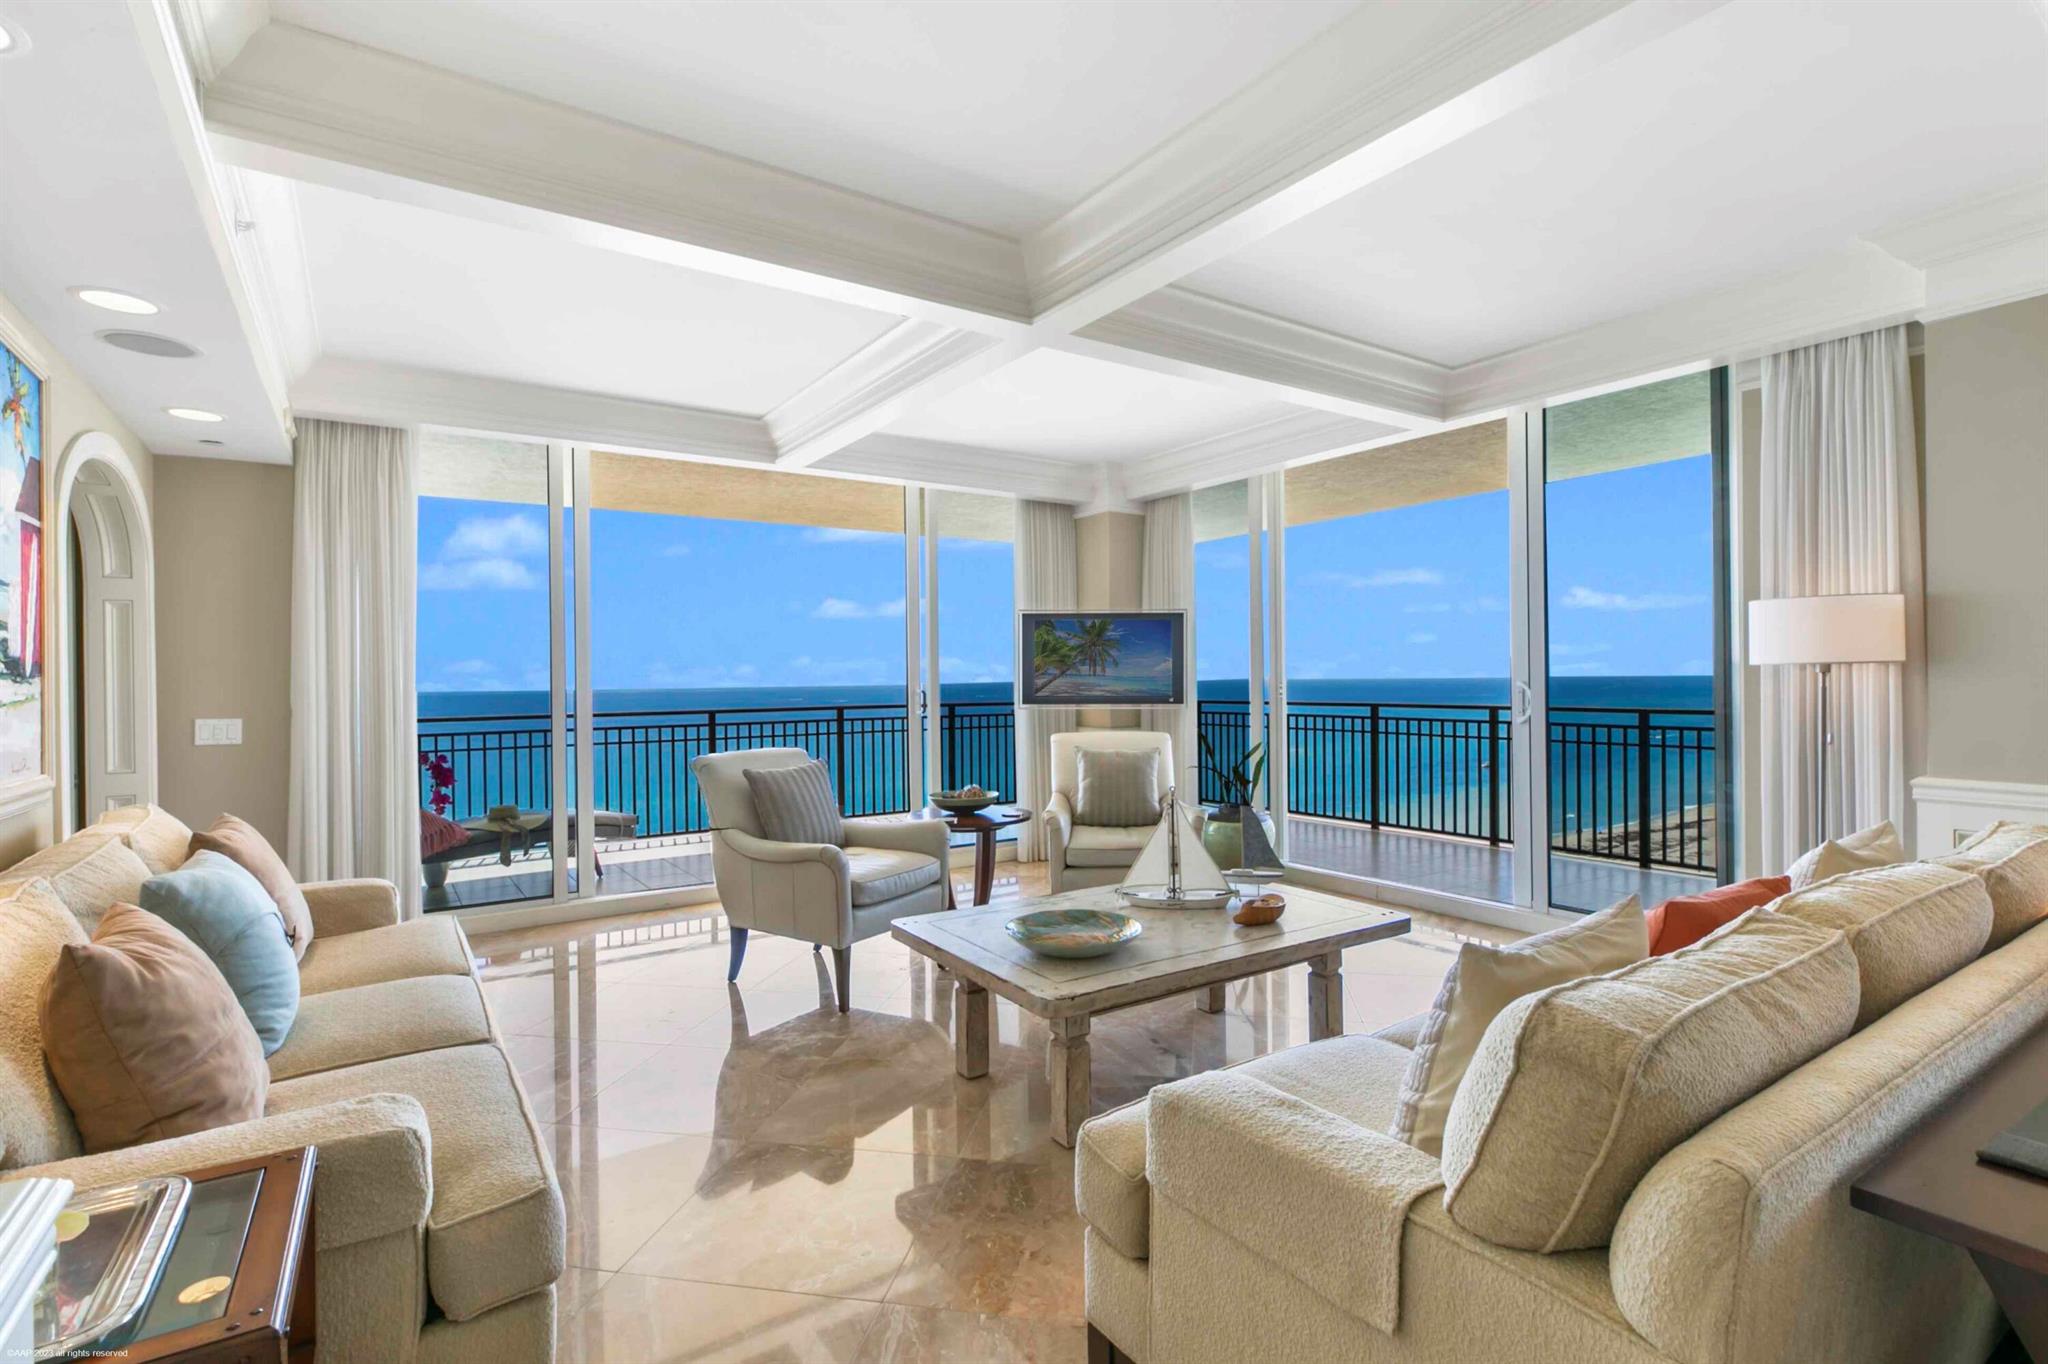 This rare 4 bedroom/5 bath ensuite, oceanfront gem at the Resort Residences of Singer Island, has spectacular direct, southeastern ocean and coastline views from every room. You can see south up the coastline as far as you can see all the way to the Breakers in Palm Beach. The immense wraparound terrace flaunts breathtaking, glowing views from sunrise to sunset! As a Master Builder's private residence, the entire domicile has been custom tailored. A private elevator opens directly into your home. From floor to ceiling you will feel the attention to architectural nuance. With Breccia Oniciata Marble tile at your feet and crown moldings, arches and coffered ceilings above your head, no detail has been spared. The Master bedroom suite has you living literally in the lap of luxury, where you wake listening to the waves roll onto the shore and welcome the day as the sun rises before your very eyes! Balcony access for your morning ritual and a gorgeous marble inlay with your personal spa style bathroom, featuring whirlpool tub, extra-large shower, bidet and his and her vanities. The kitchen is equipped with state-of-the-art Viking appliances and a marble island and bar for easy entertainment. The Resort at Singer Island features 2 pools, a lagoon style pool, waterslide and waterfalls, an infinity lap pool with cabanas, 8500 square foot spa and fitness center, movie theater, billiards room, restaurants, bars, concierge, and valet parking as well as your own private wine locker within 3800 Ocean Restaurant Bar and Lounge to be accessed and served by waitstaff at your desire. The Resort at Singer Island was built in 2007 as a luxury resort and private residence featuring 239 all-suite 1- and 2-bedroom hotel units and 66 private 3- and 4-bedroom residential condominiums. The extraordinary private section is made up of 4 residences per floor with private elevators. The private residence section has its own full-time manager and staff, movie theater, billiard, and social rooms. The Resort also includes 4,000 square feet of meeting space, an 8,500 square foot spa. Butler service, valet attendants and a full-time concierge enrich residents and guest's experiences and activities including coordination of private events, theater tickets, dinner reservations and travel arrangements. Dining options available to residents include an alfresco ambiance at the oceanfront eating, the convenience of room service, or catered special events held at the Resort grounds, and a wine room that is available to store private wine collections.